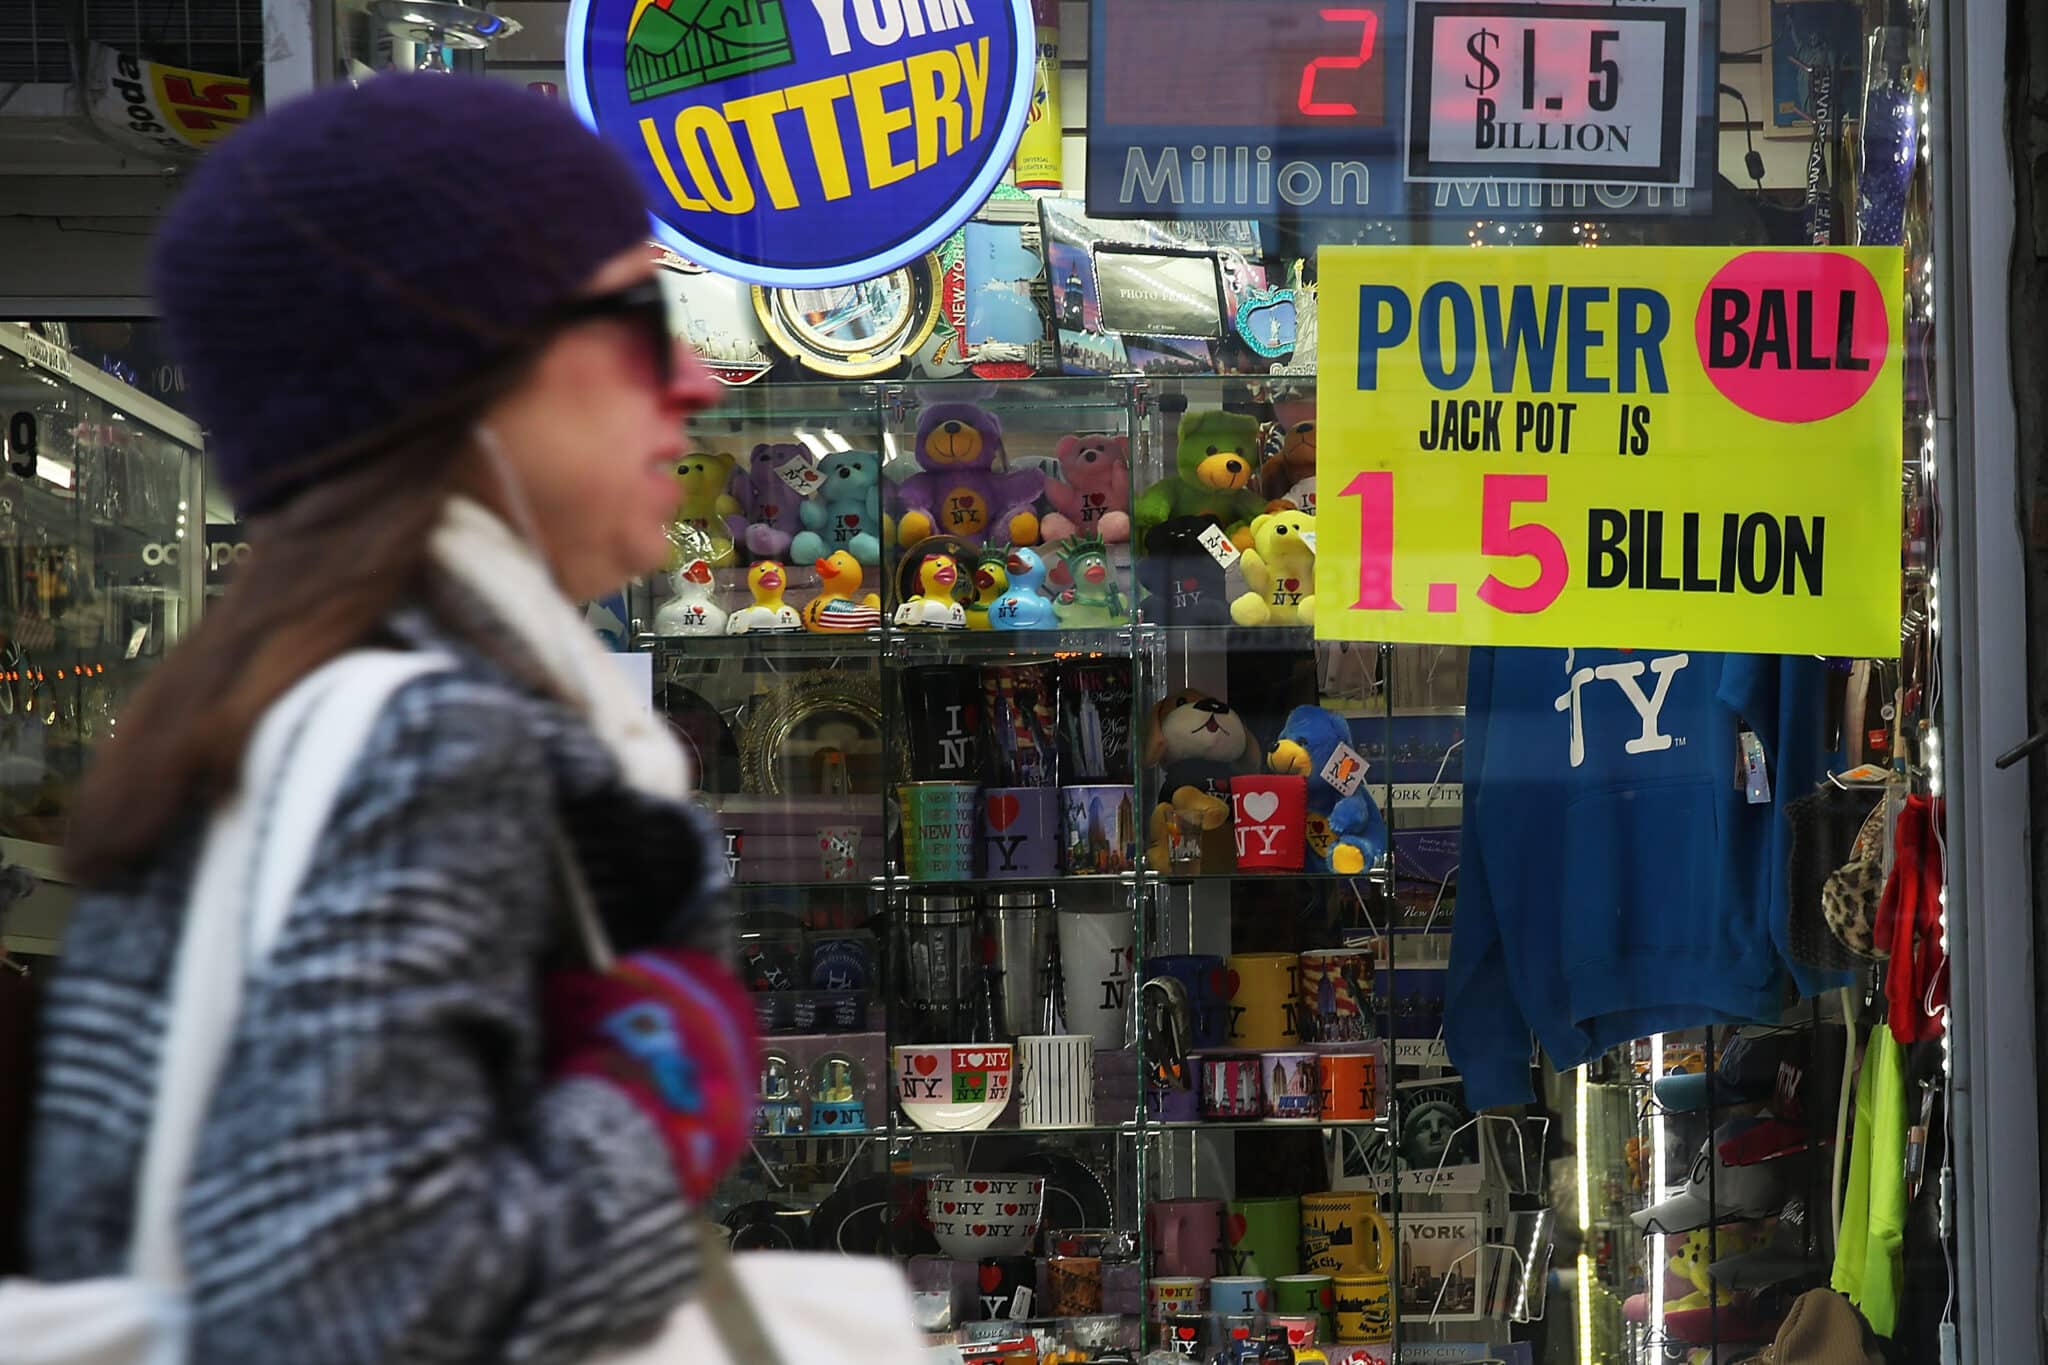 NEW YORK, NY - JANUARY 13:  A sign advertises the Powerball jackpoy
outside of a magazine store on January 13, 2016 in New York City. After no winners were declared in recent drawings, Wednesday night's $1.5-billion jackpot is the biggest in lottery history. Powerball is played in 44 states and three U.S. territories.  (Photo by Spencer Platt/Getty Images)